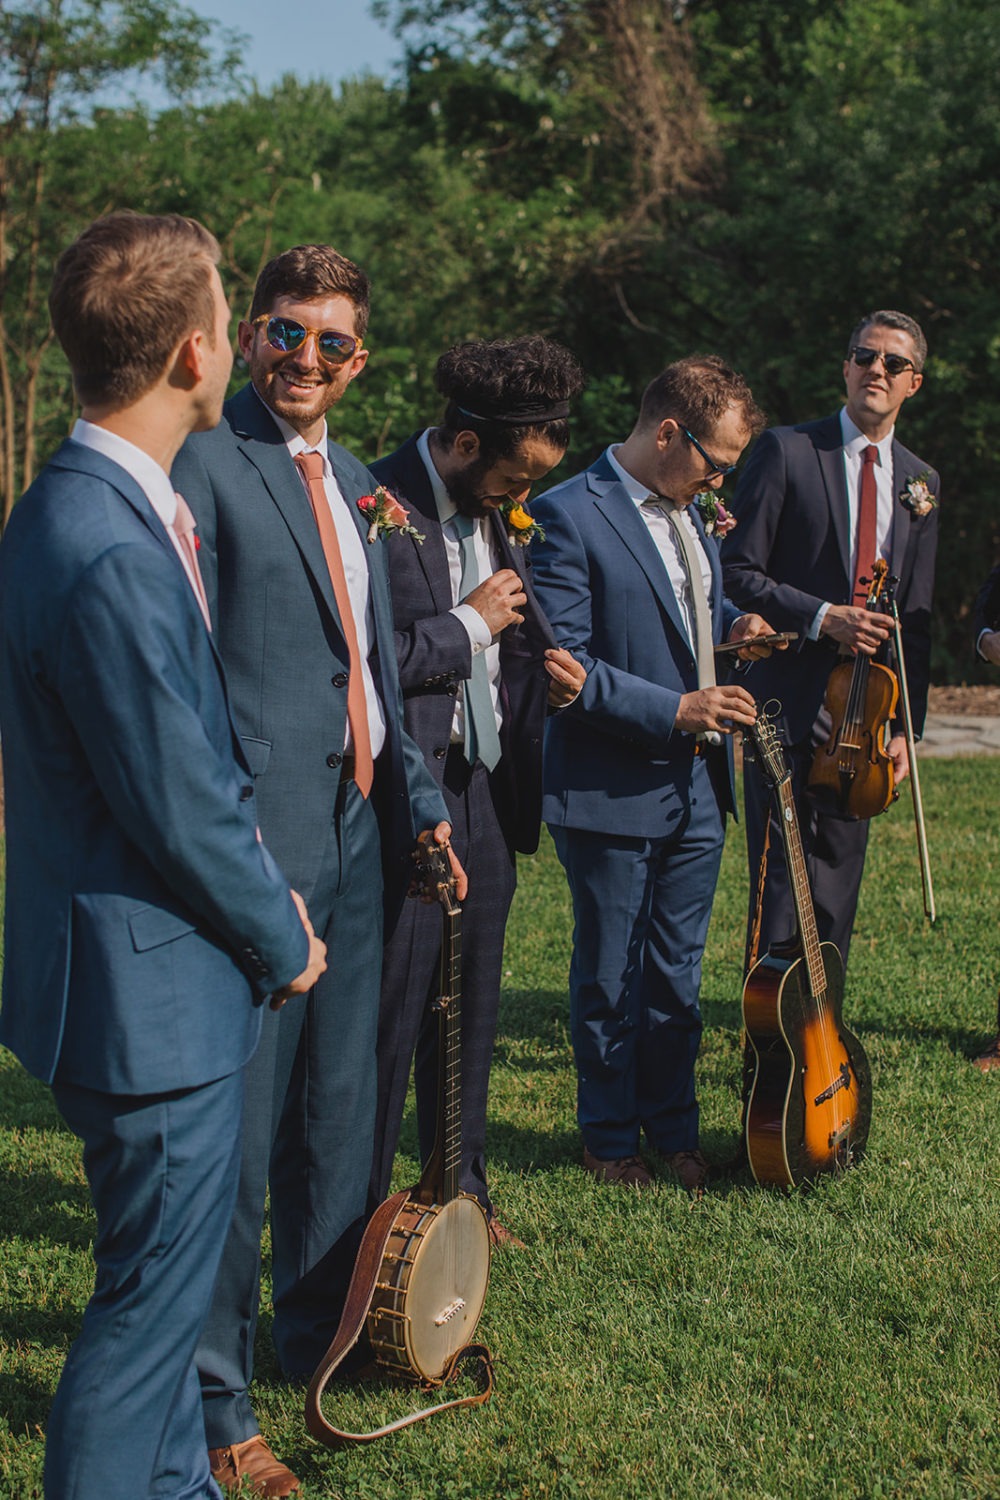 Groomsmen hold instruments while standing beside groom during ceremony